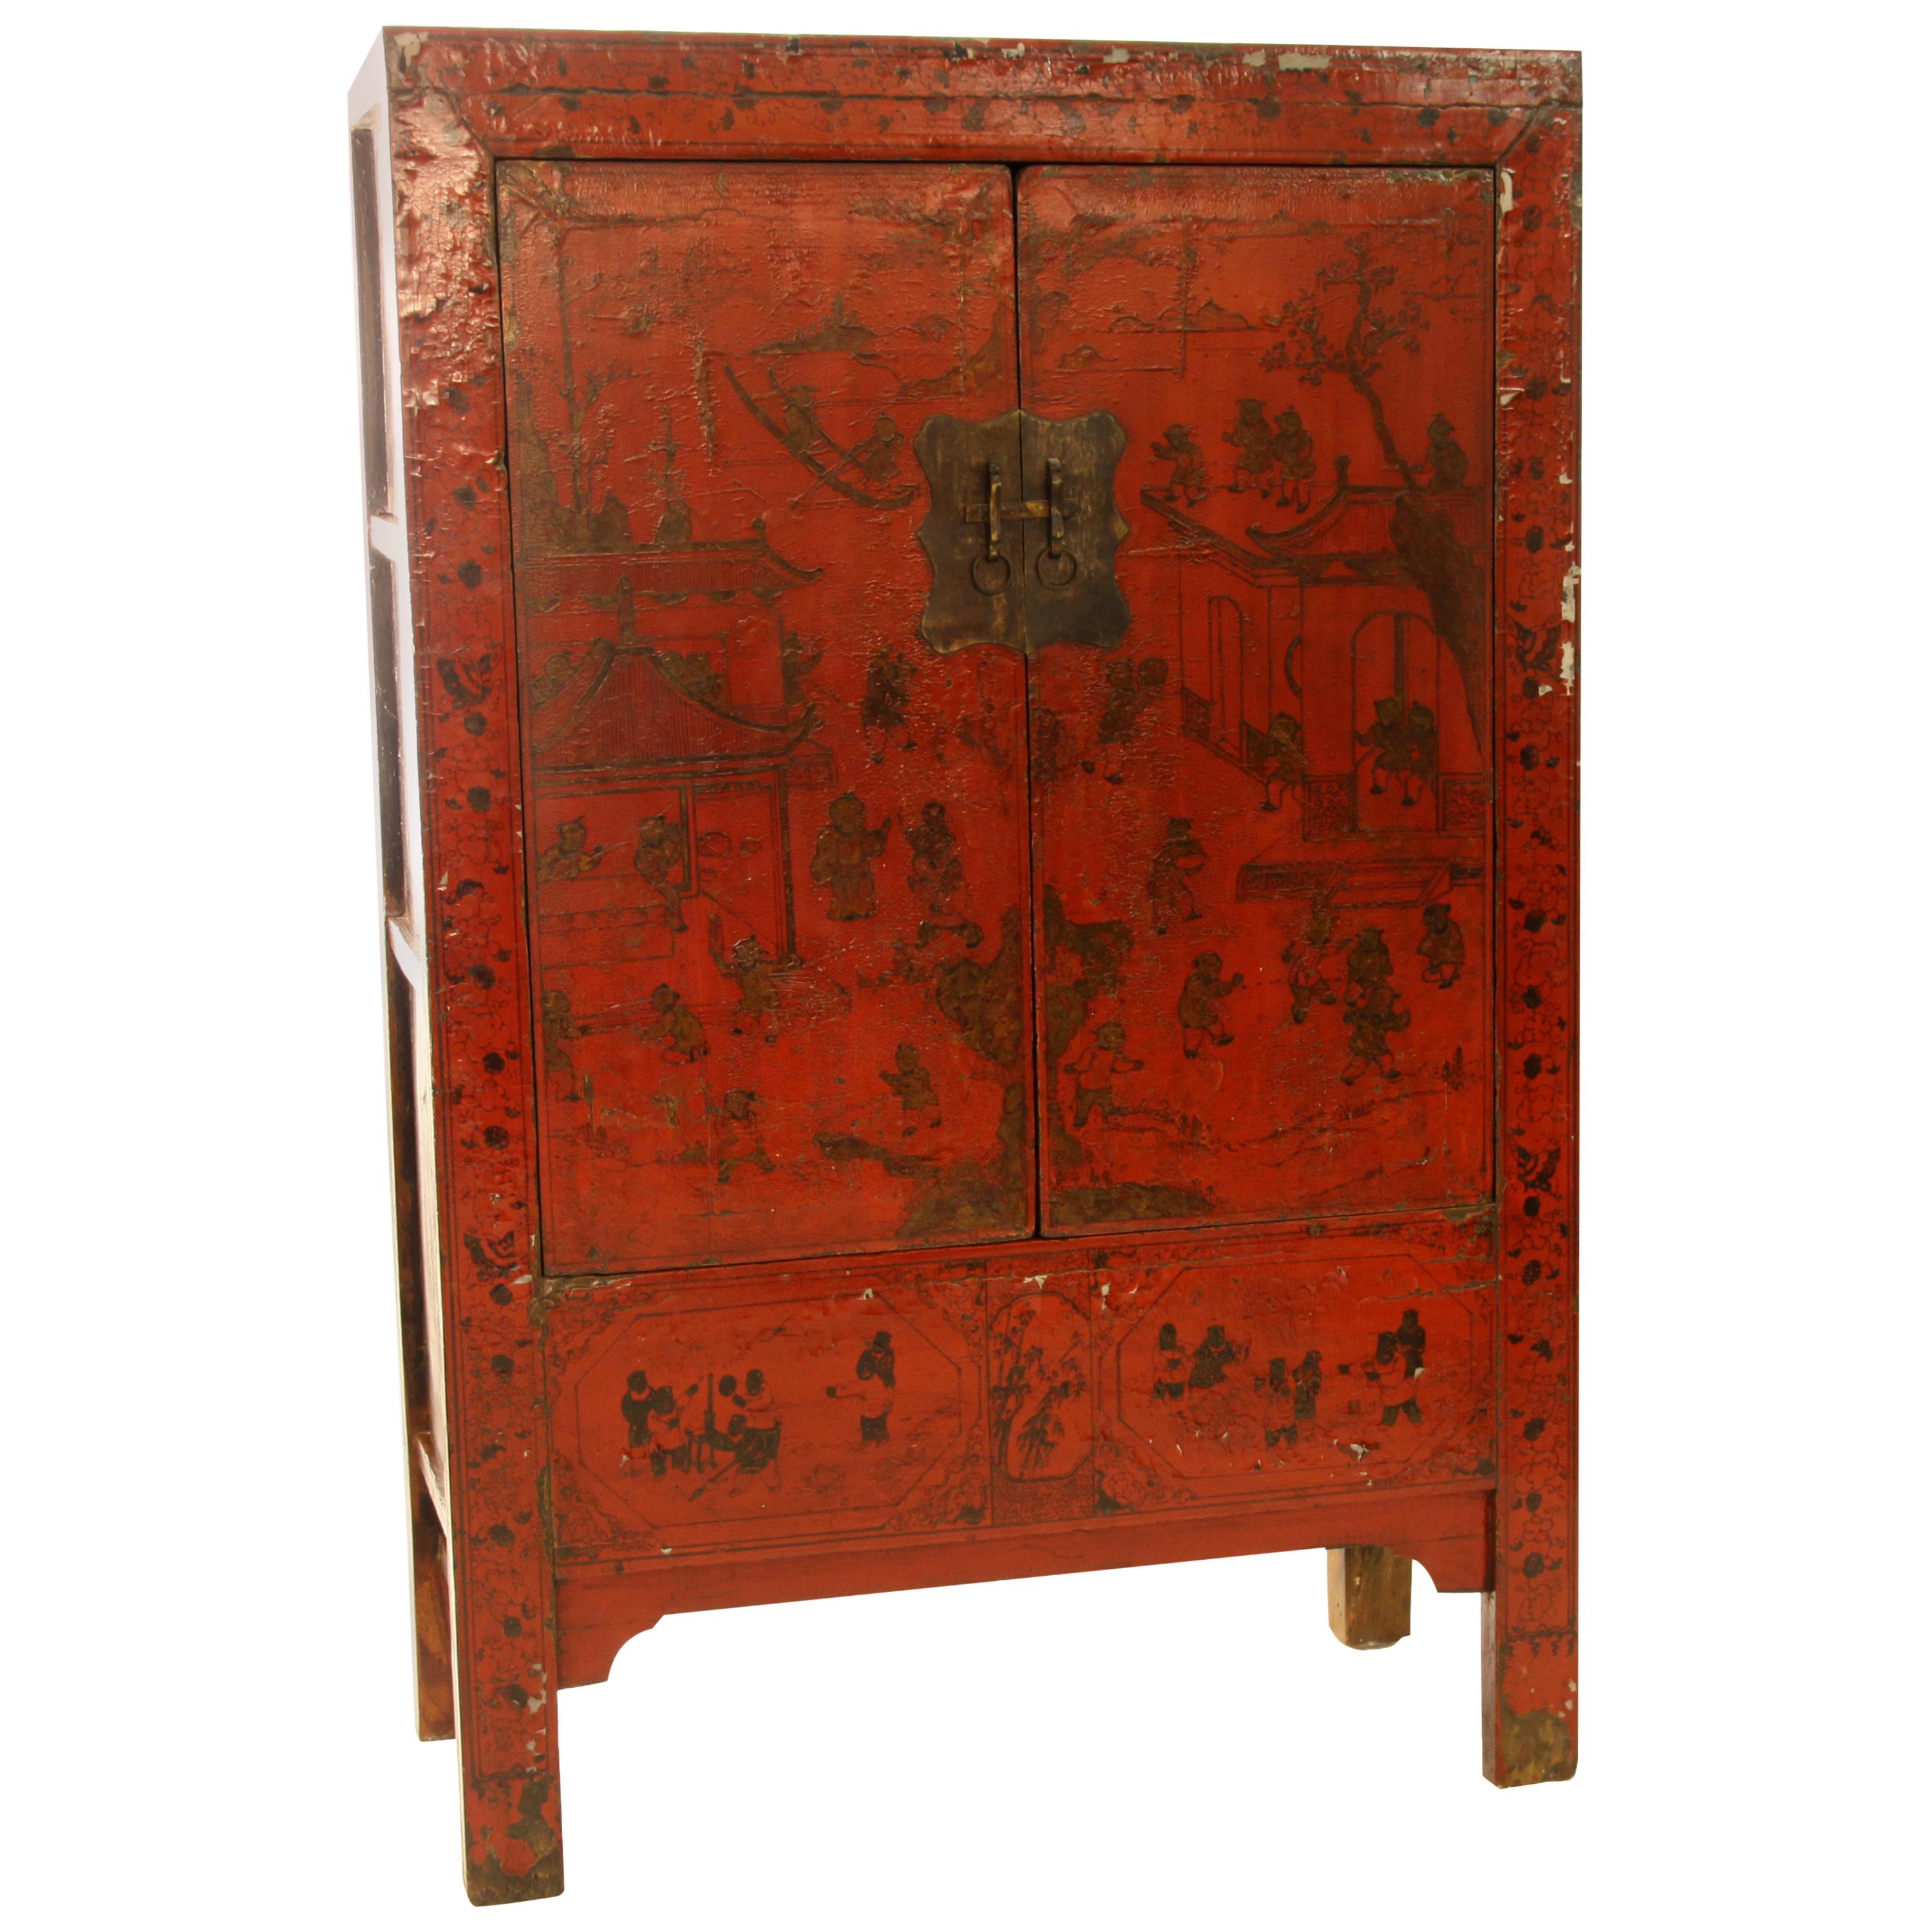 Antique Chinese Red Lacquer Cabinet with Gilt Hand-Painting